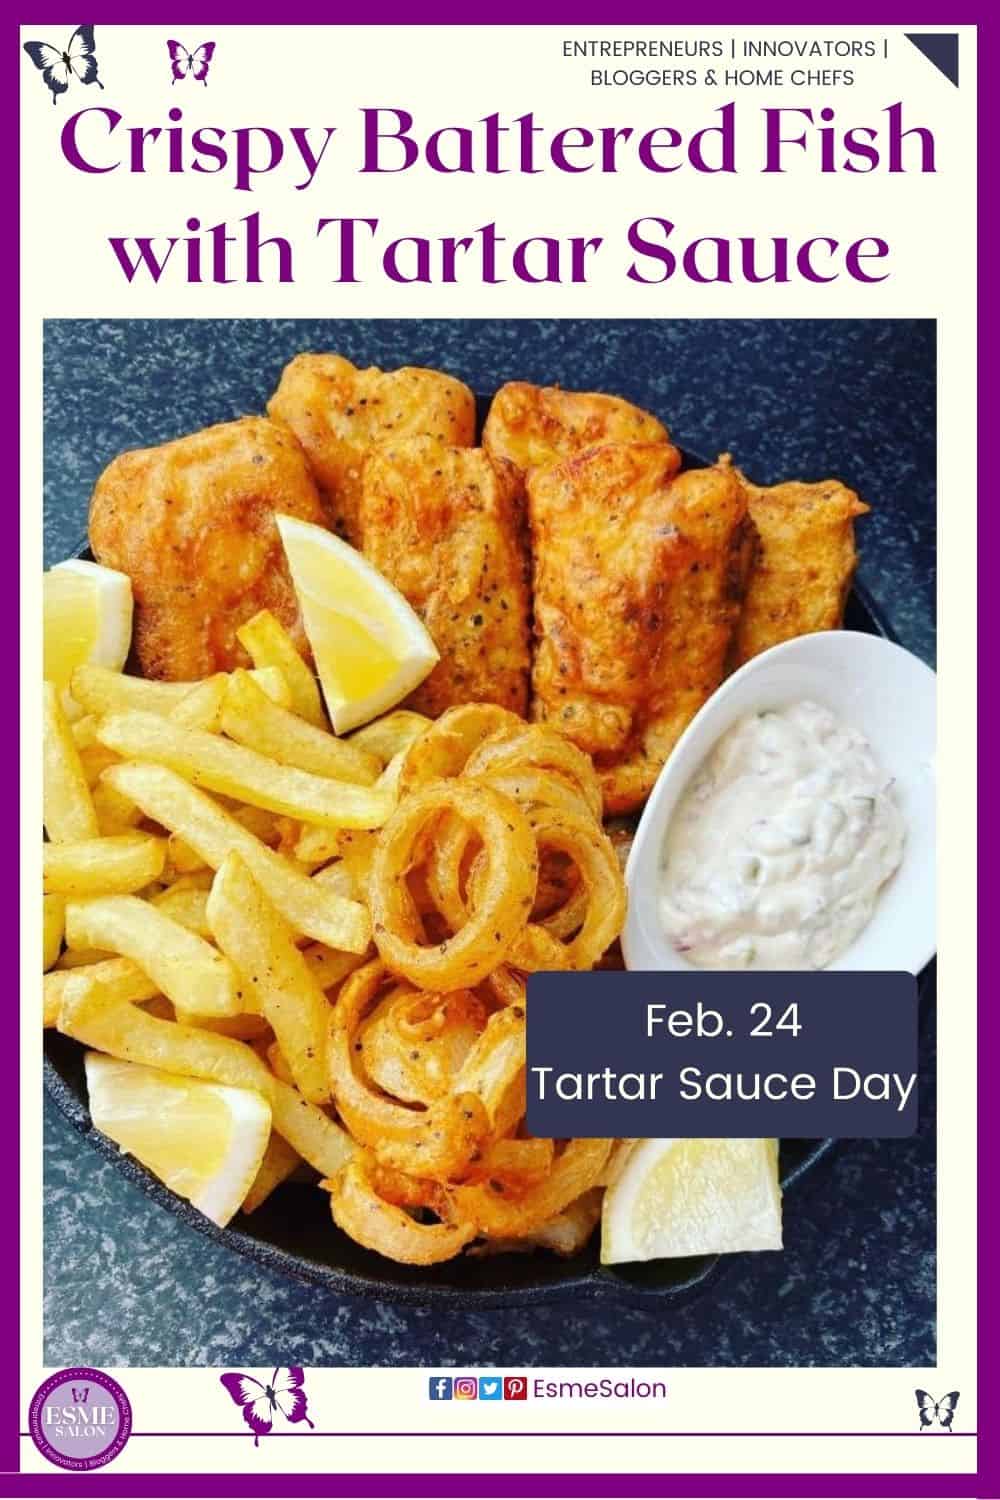 an image of Crispy Battered Fish with Tartar Sauce and onion rings